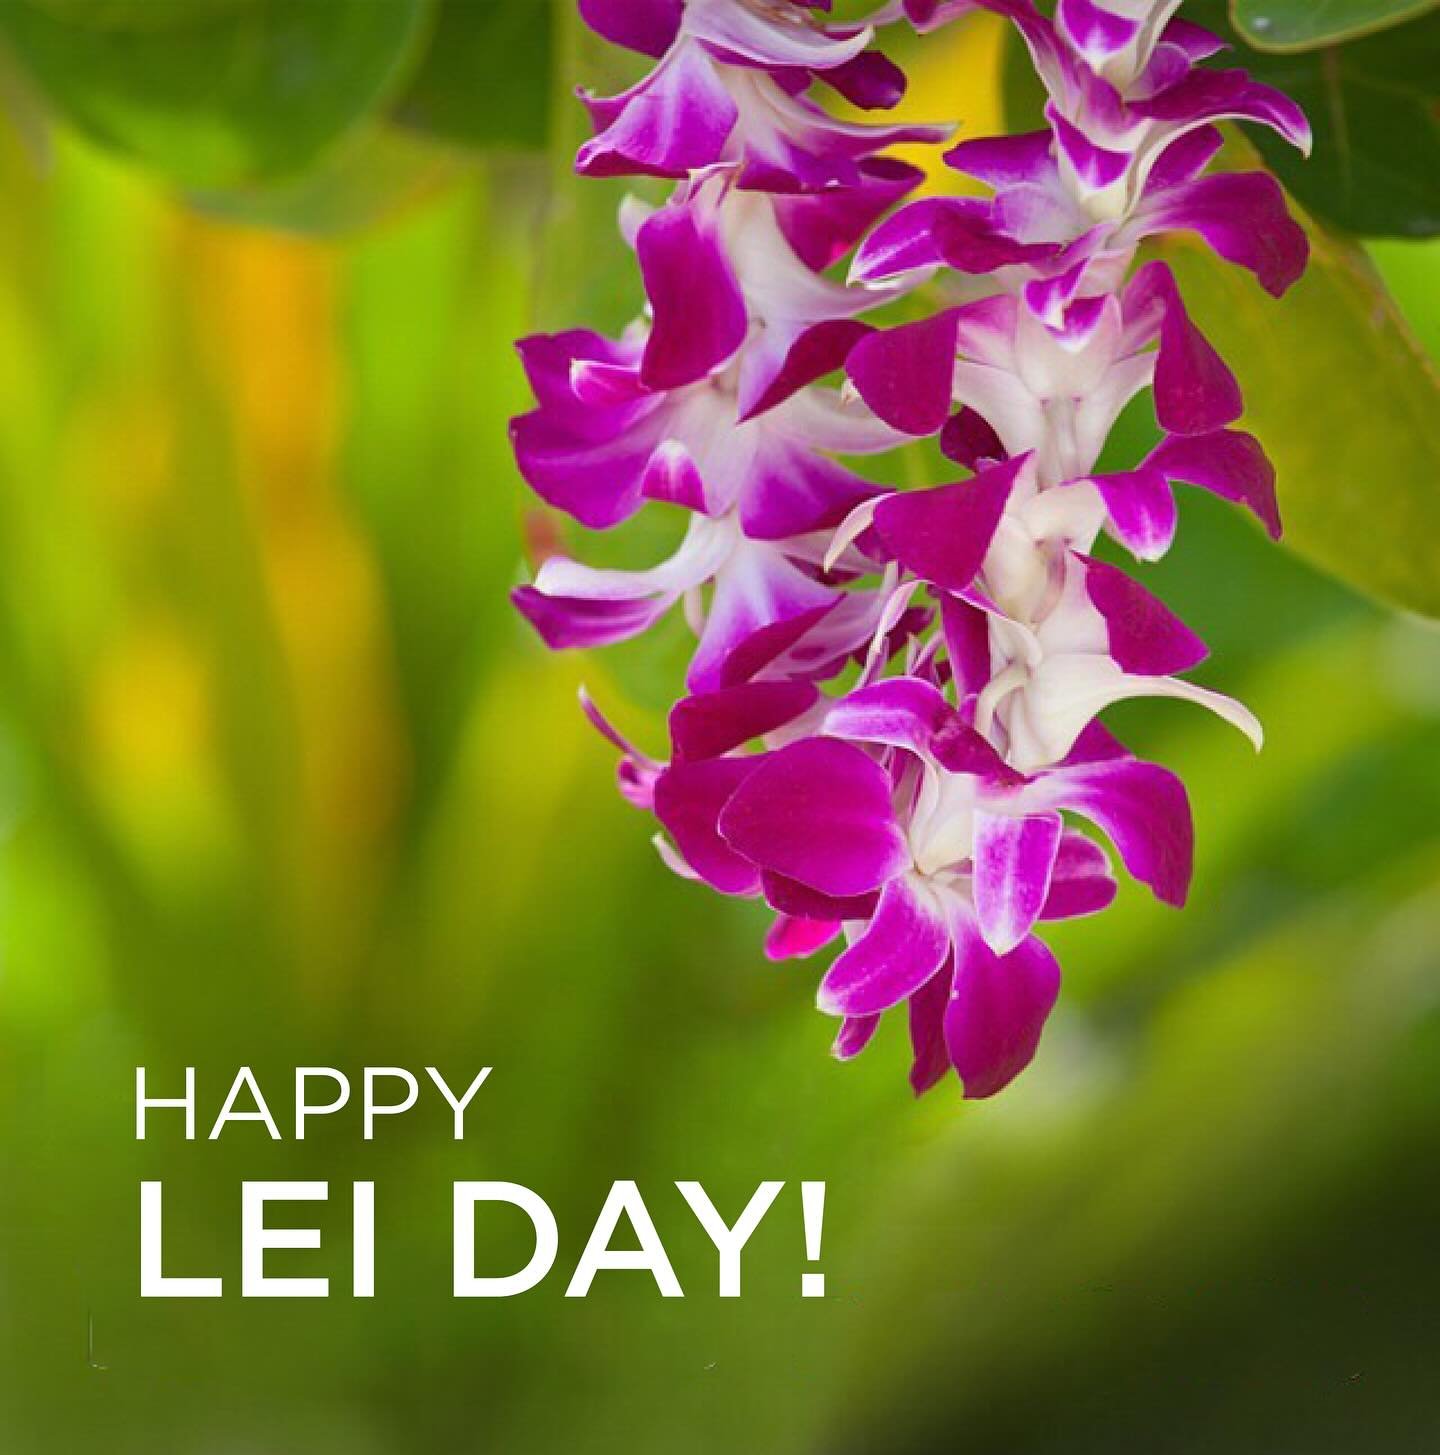 Did you know &ldquo;May Day is Lei Day in Hawaii?&rdquo; 

May 1st was officially established as a holiday here in Hawaii in 1929 and is a day of celebrating the aloha spirit.

Each Hawaiian island has a color and flower associated with it, and there